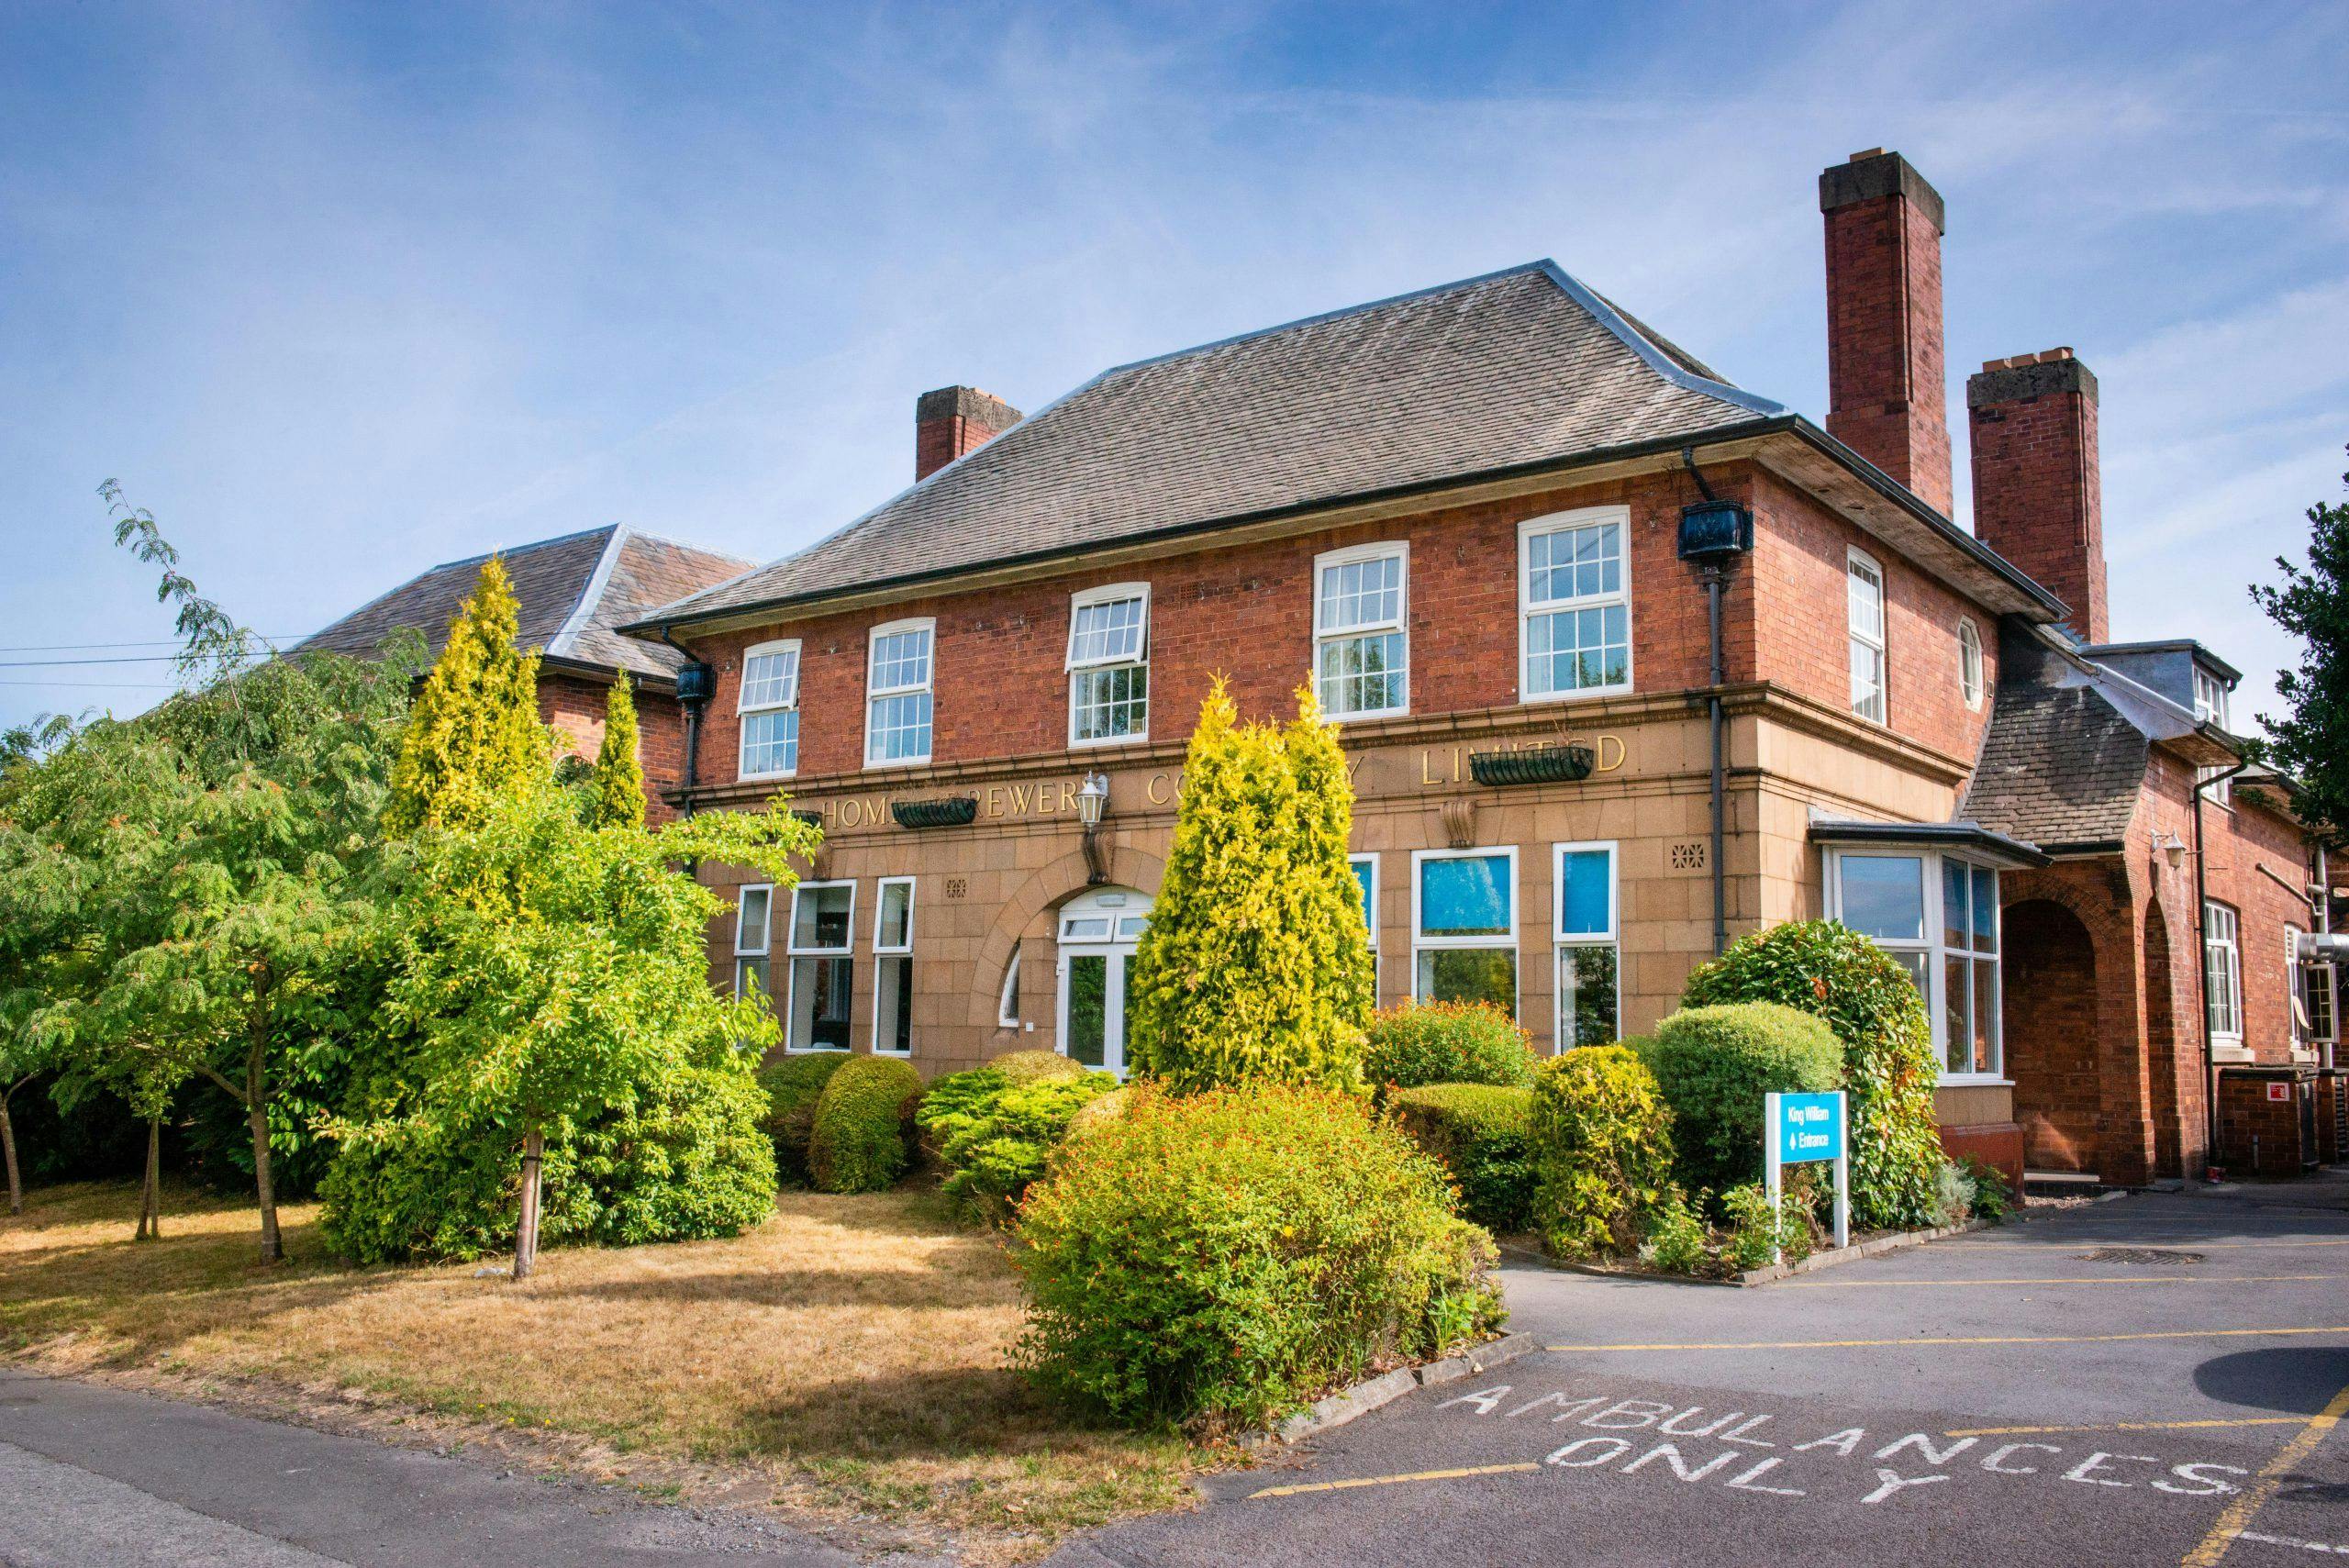 Exterior of The King William Care Home in Ripley, Derbyshire